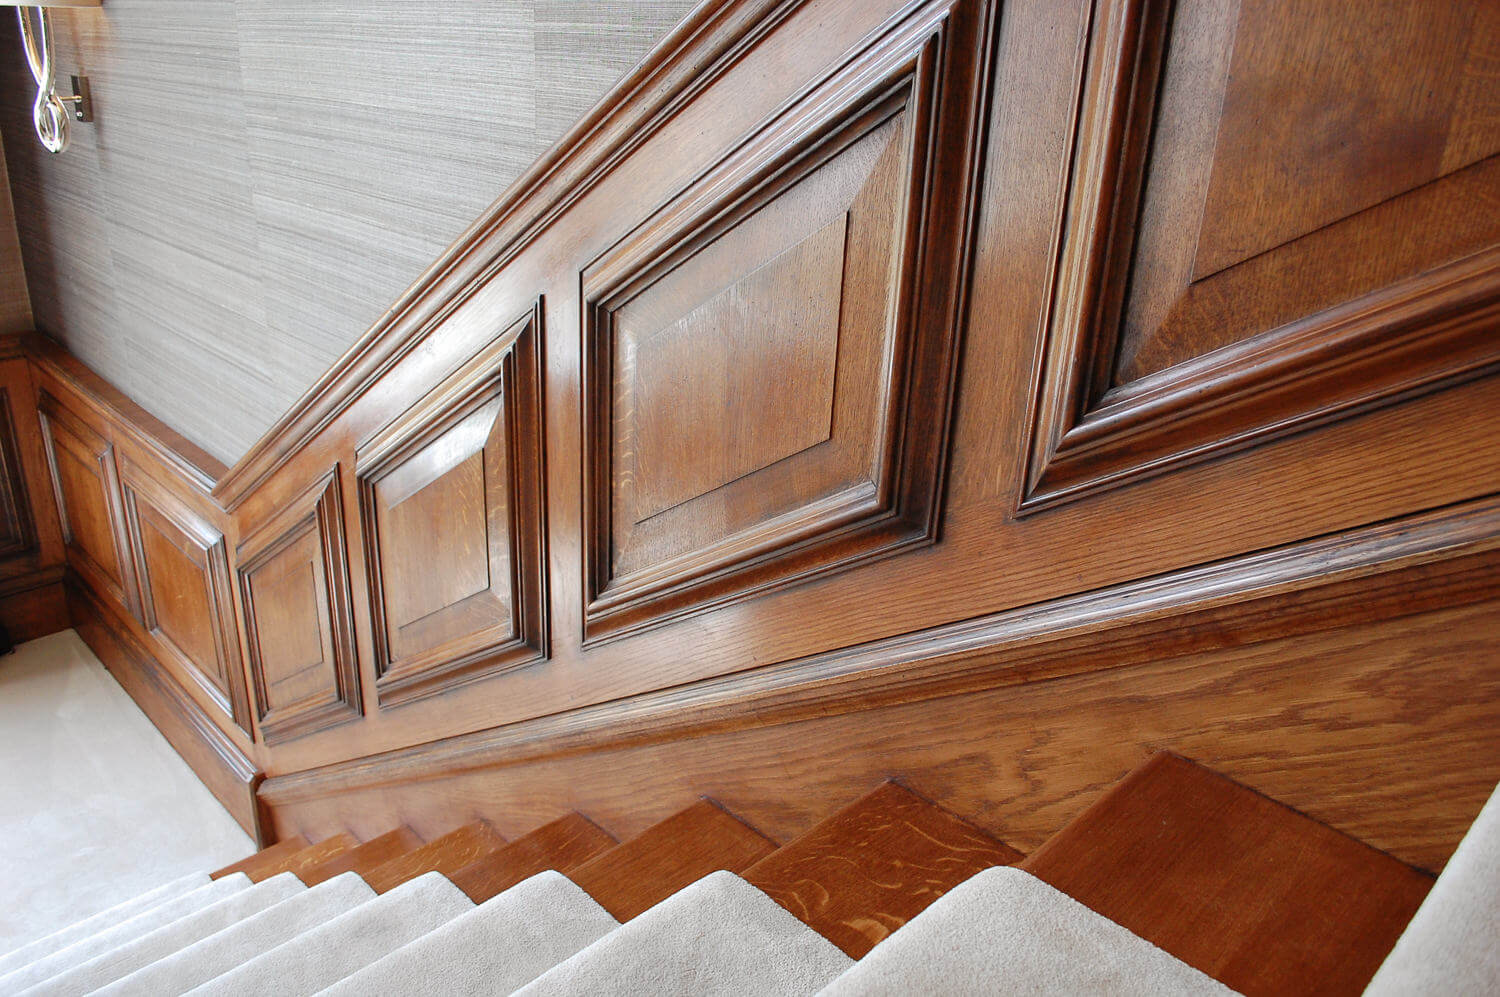 18th century style Georgian interiors and made to order bespoke staircase oak panelling